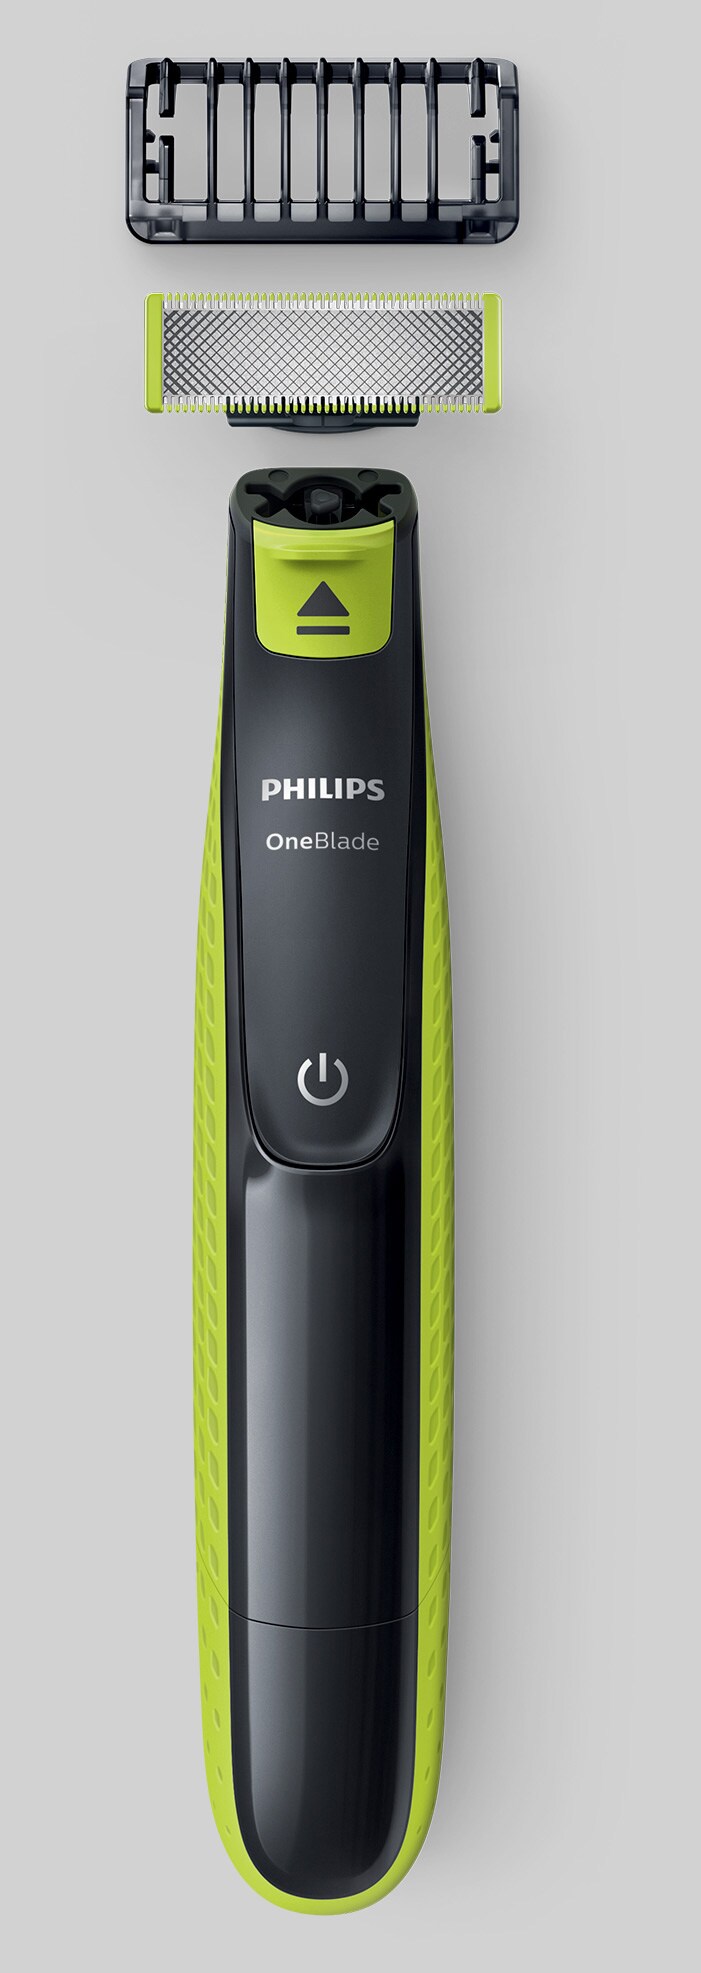 one blade philips blade